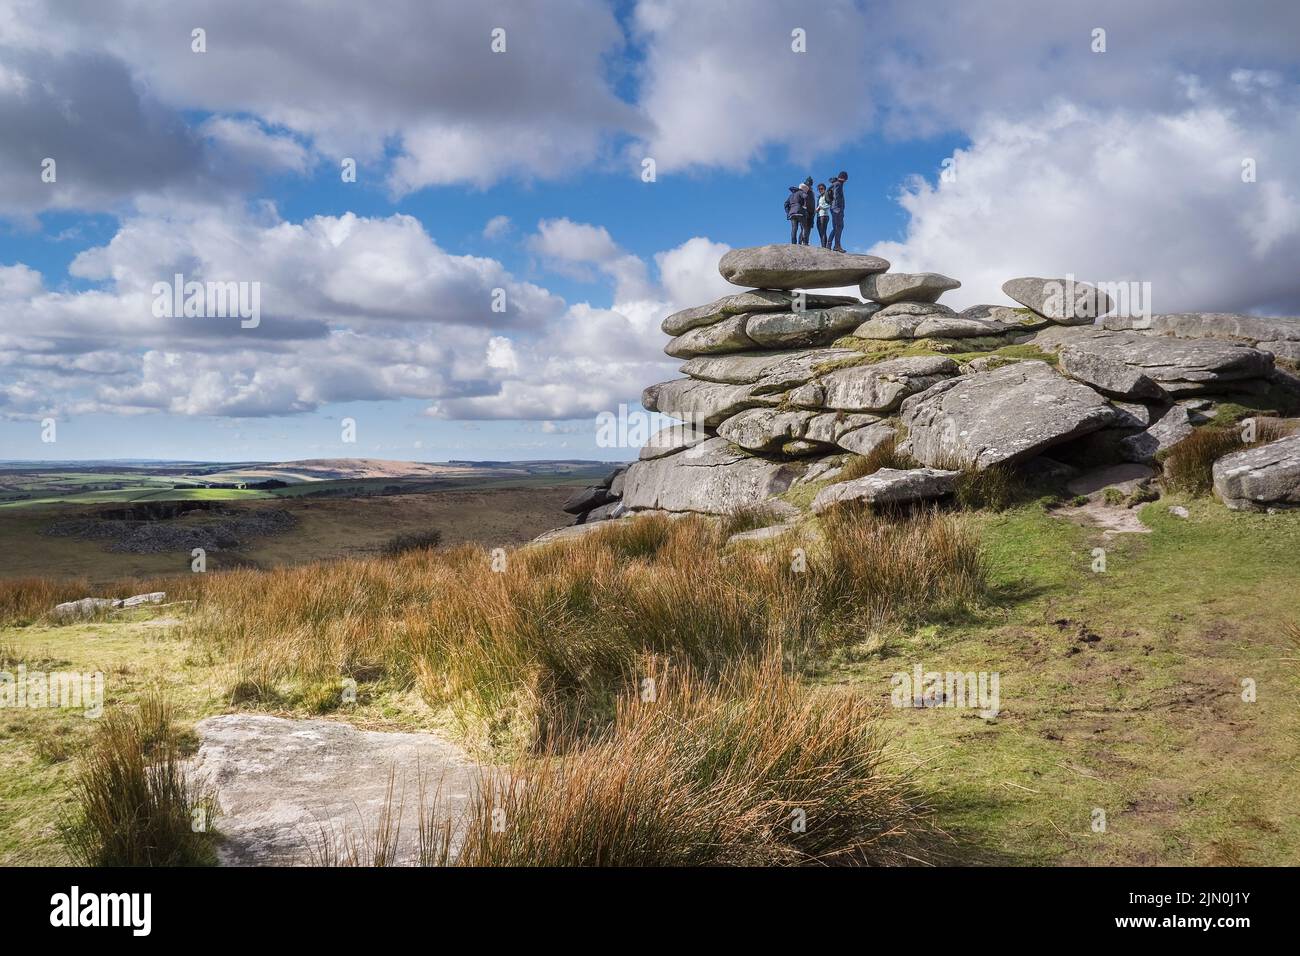 A group of walkers standing on the top of a rock stack left after glacial action on the summit of Stowes Hill on Bodmin Moor in Cornwall. Stock Photo